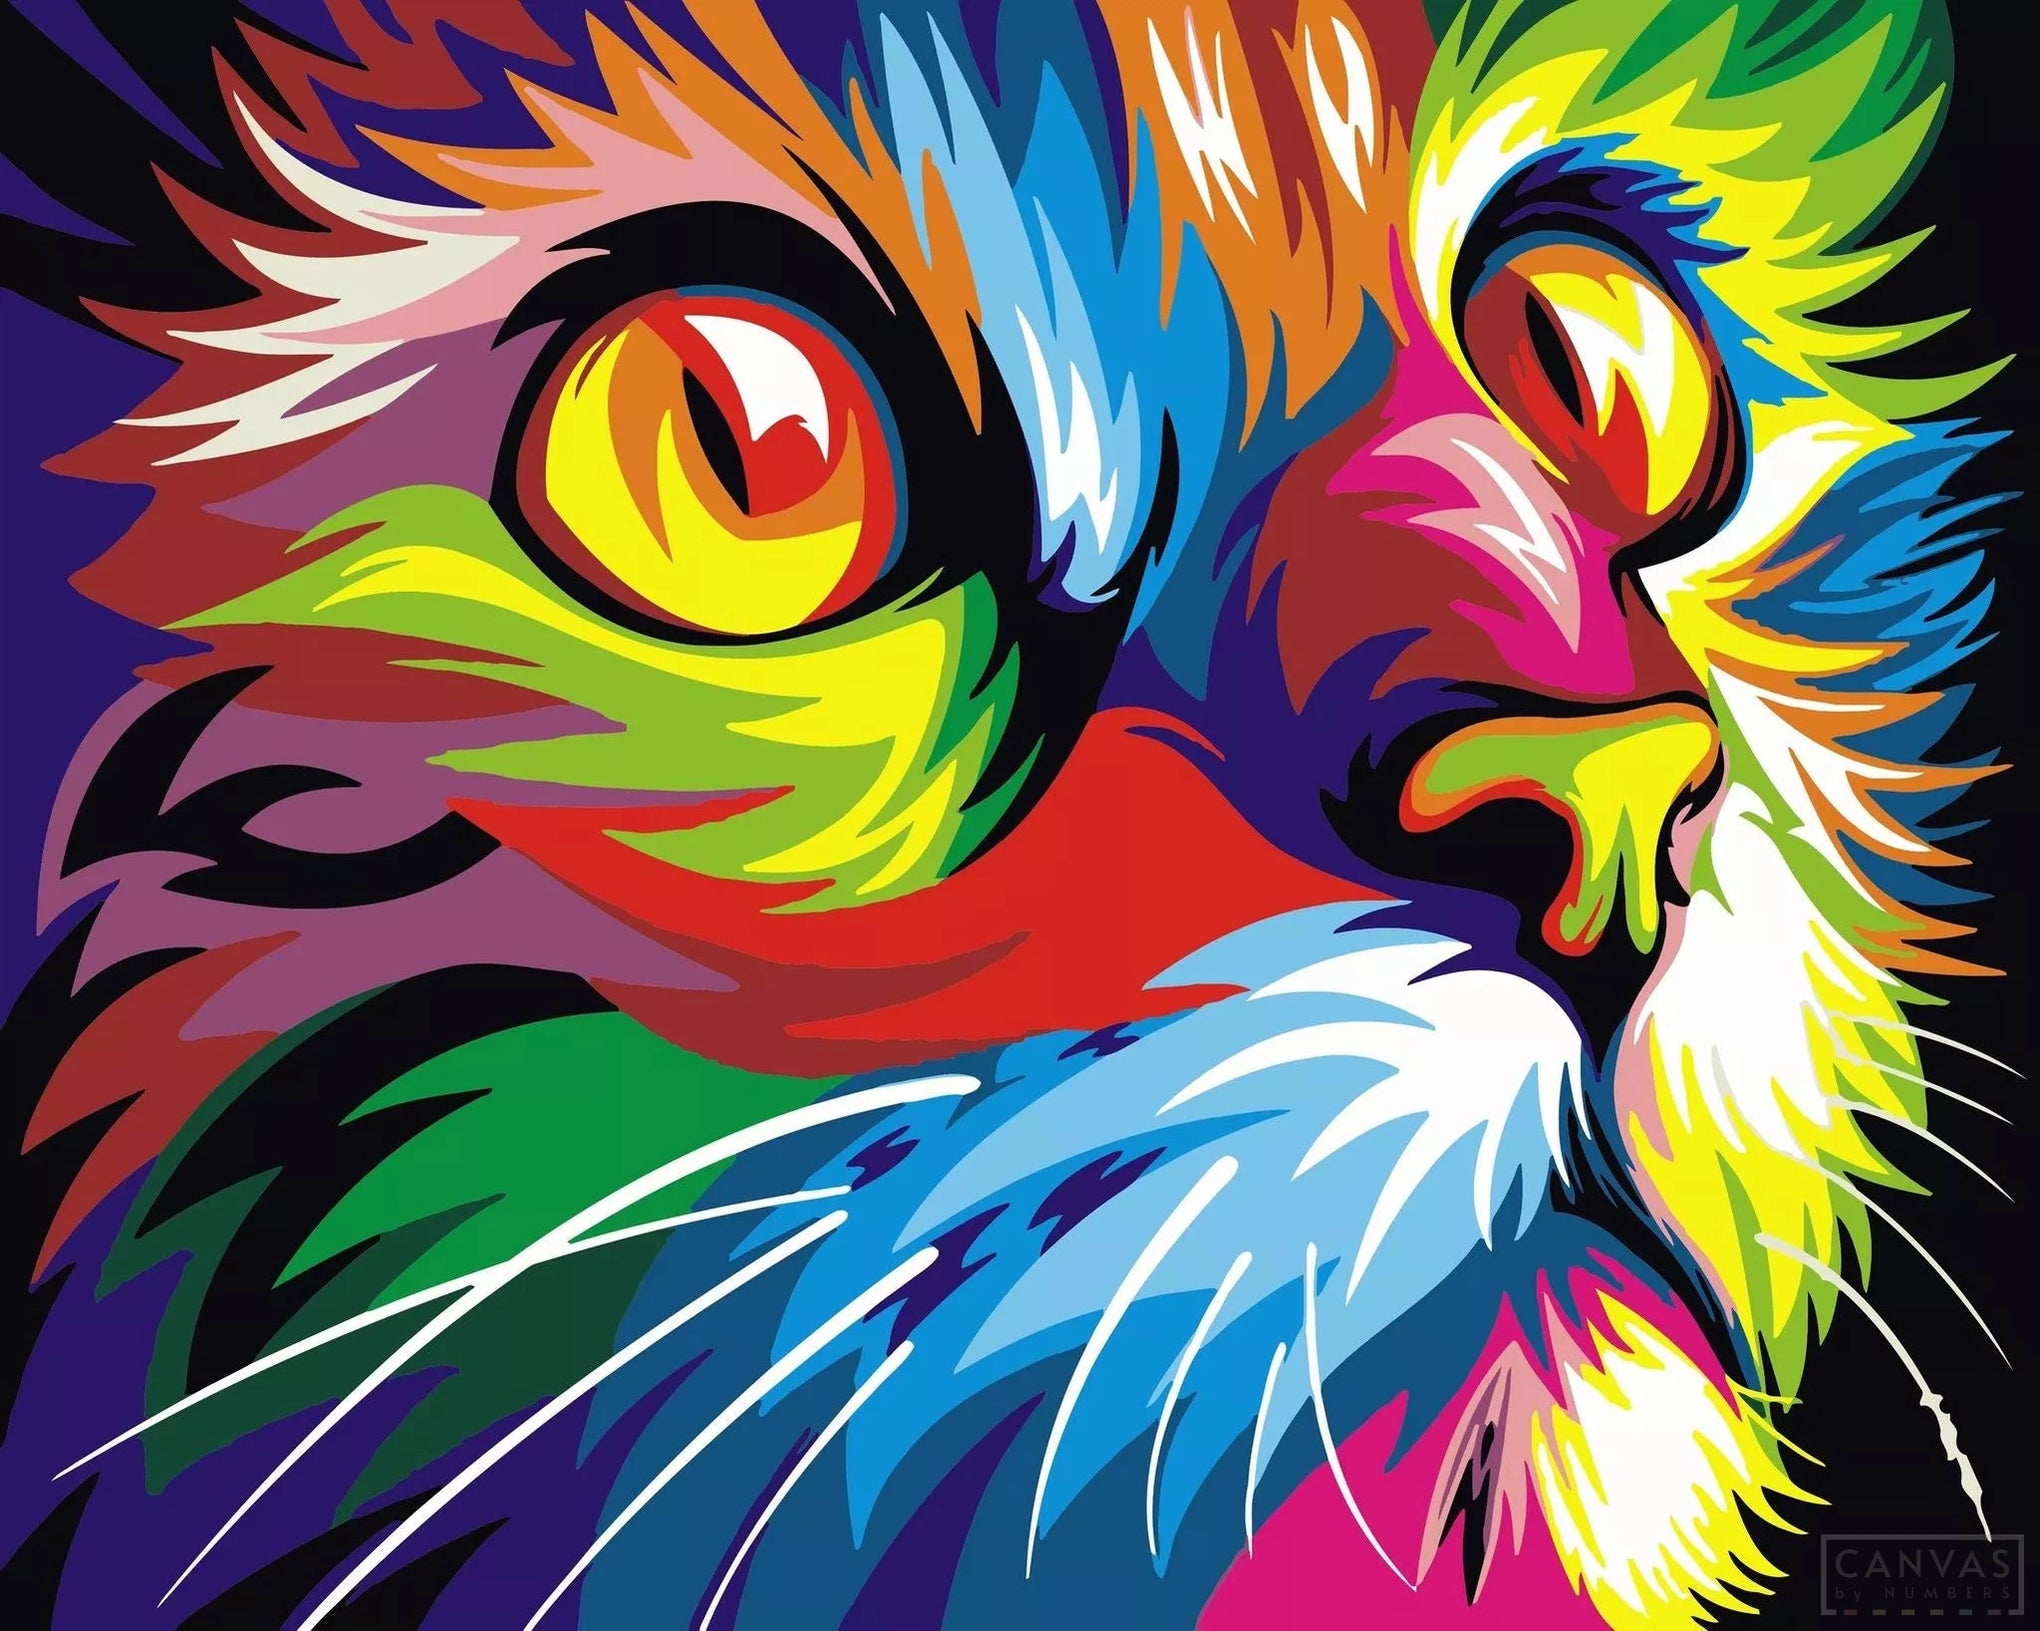 https://canvasbynumbers.com/cdn/shop/files/abstract-cat-face-diamond-painting-kit-paint-by-numbers-canvas-by-numbers-16x20-40x50cm.webp?v=1691103155&width=2040